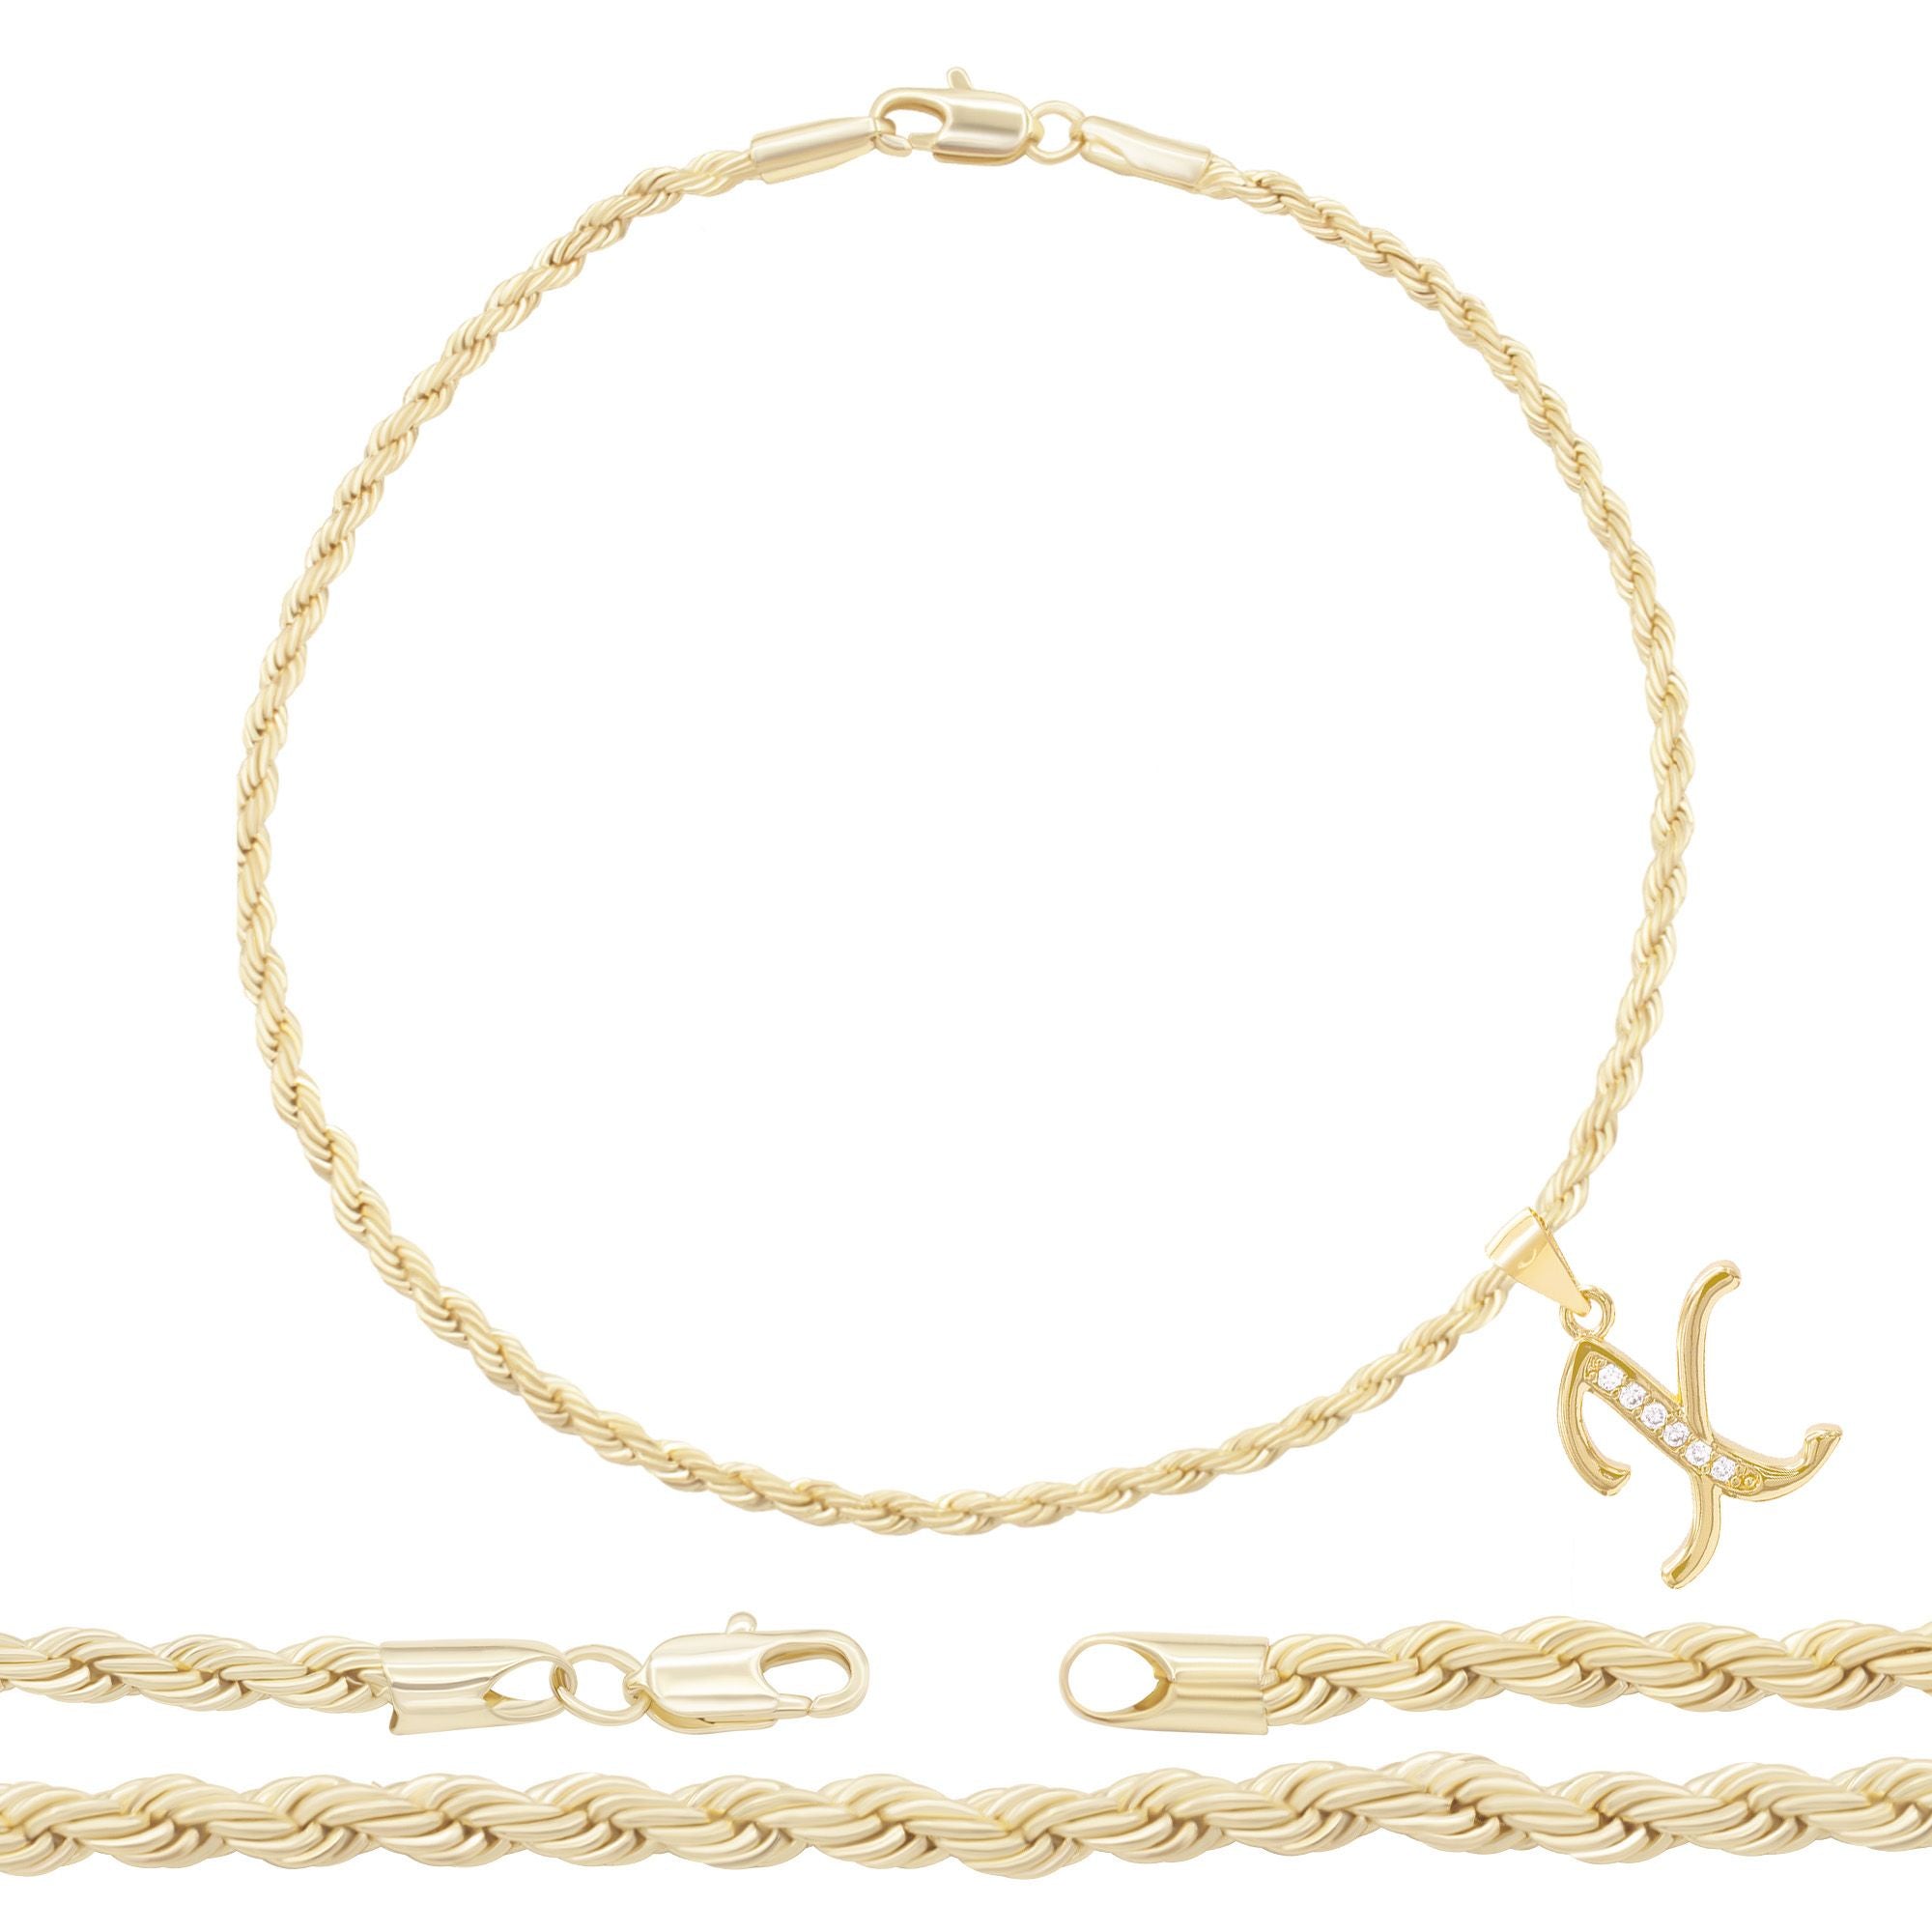 A-Z Initial Letter Pendant 14K Gold Filled Cubic Zirconia Rope Chain Anklet 10" Set 2.4 mm  Women Jewelry